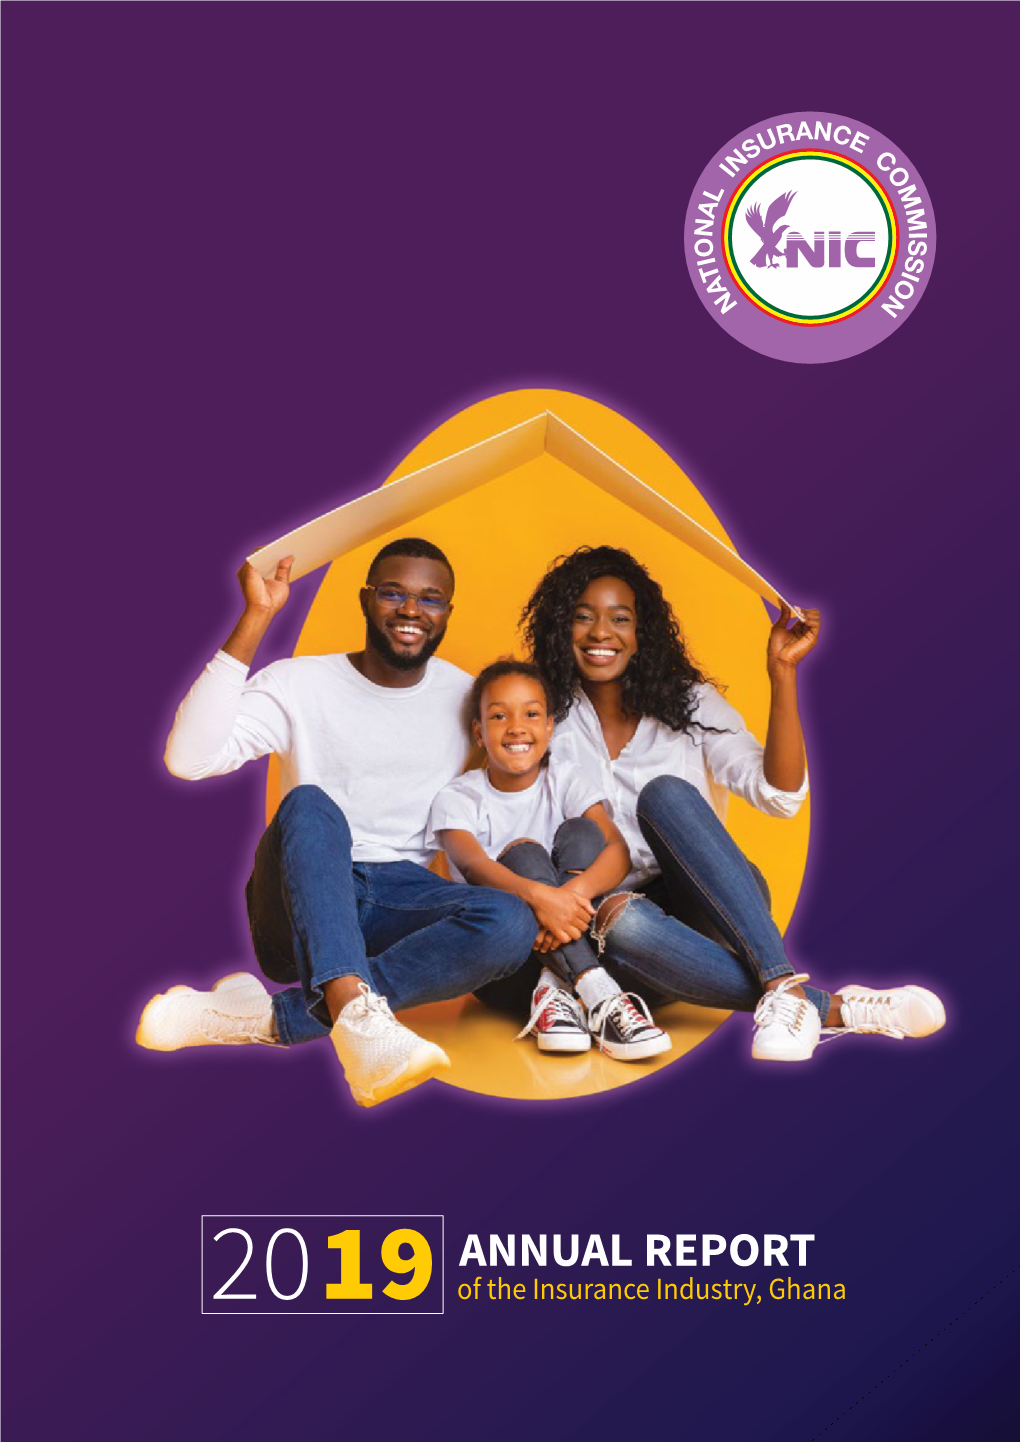 ANNUAL REPORT 2019 of the Insurance Industry, Ghana